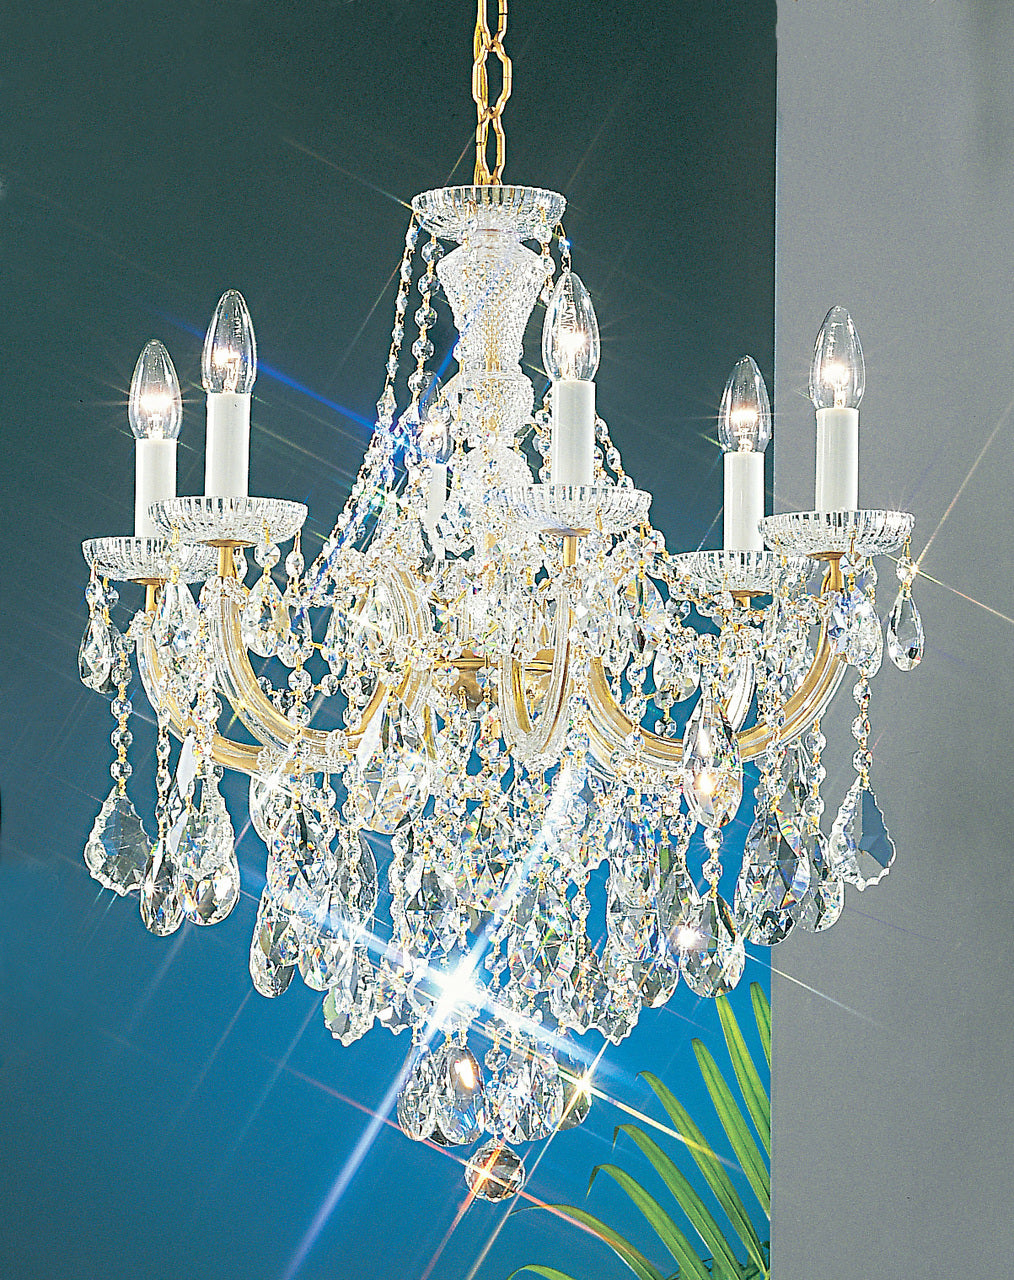 Classic Lighting 8121 OWG C Maria Theresa Traditional Crystal Chandelier in Olde World Gold (Imported from Italy)